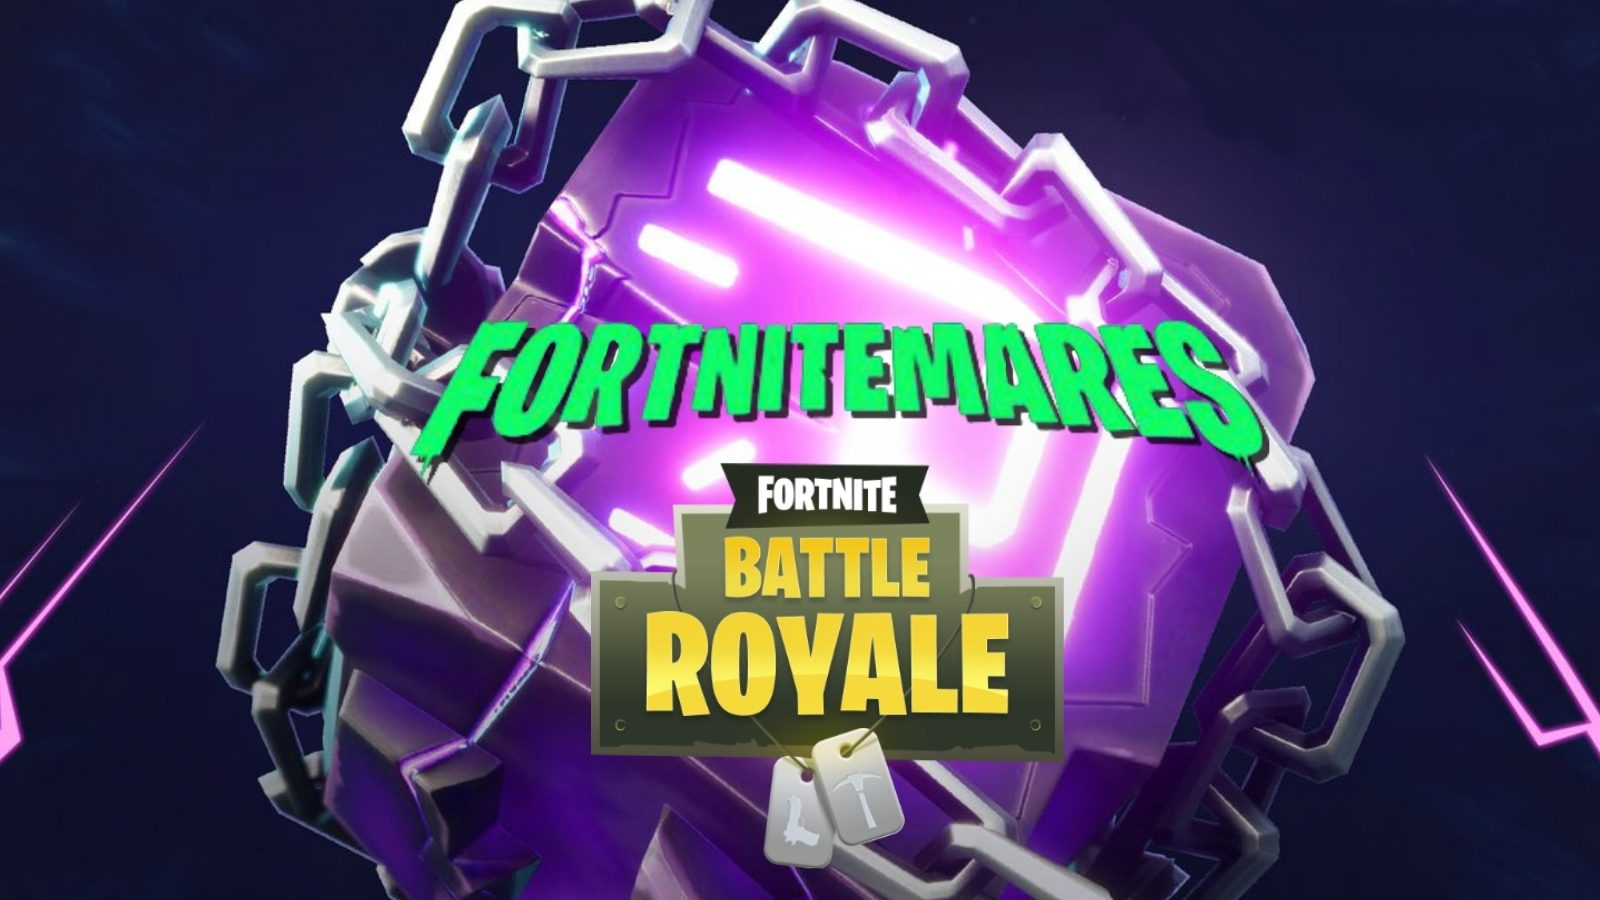 Teasers For Fortnitemares Seem To Be A Puzzle Making One Larger